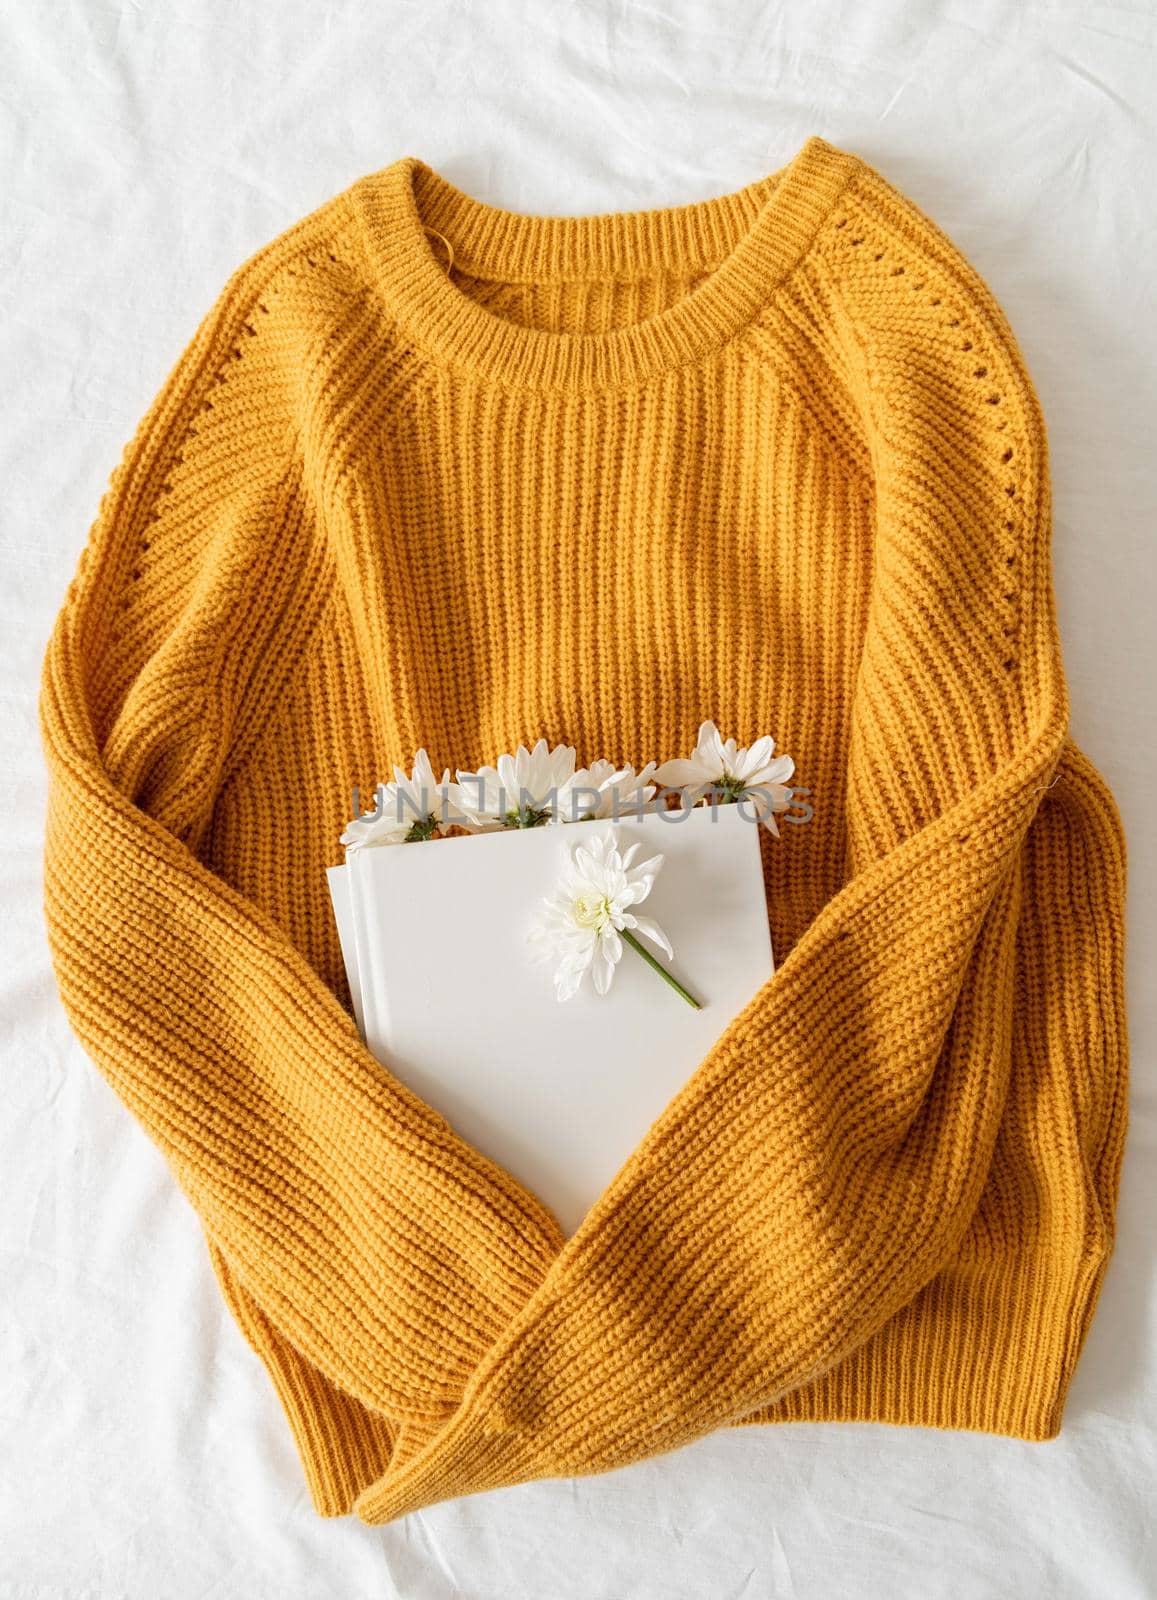 Top view of a book with white chrysanthemum flowers on yellow sweater by Desperada